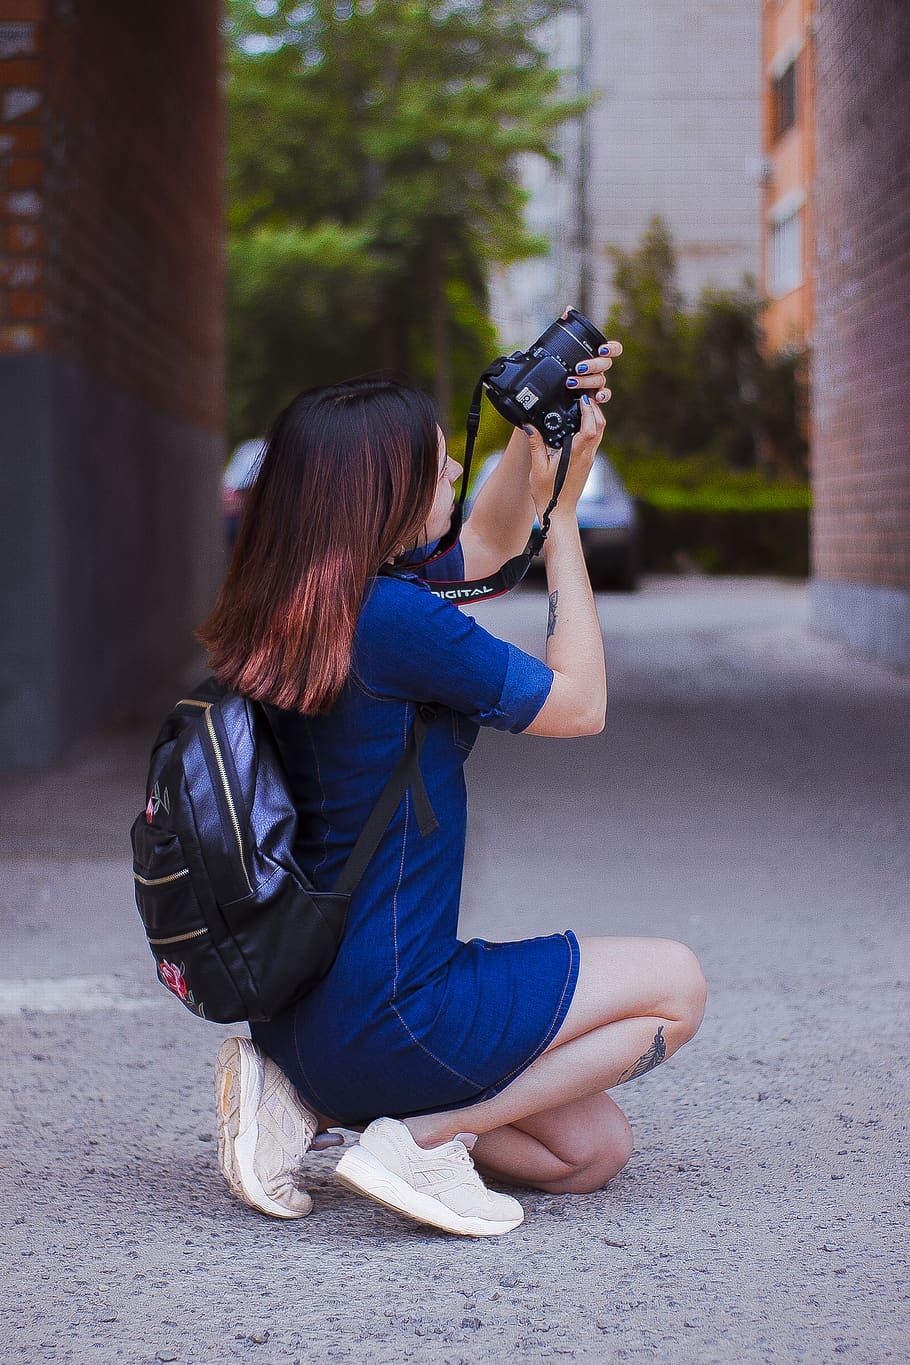 Photography of a Woman Kneeling While Taking a Picture, backpack, HD wallpaper